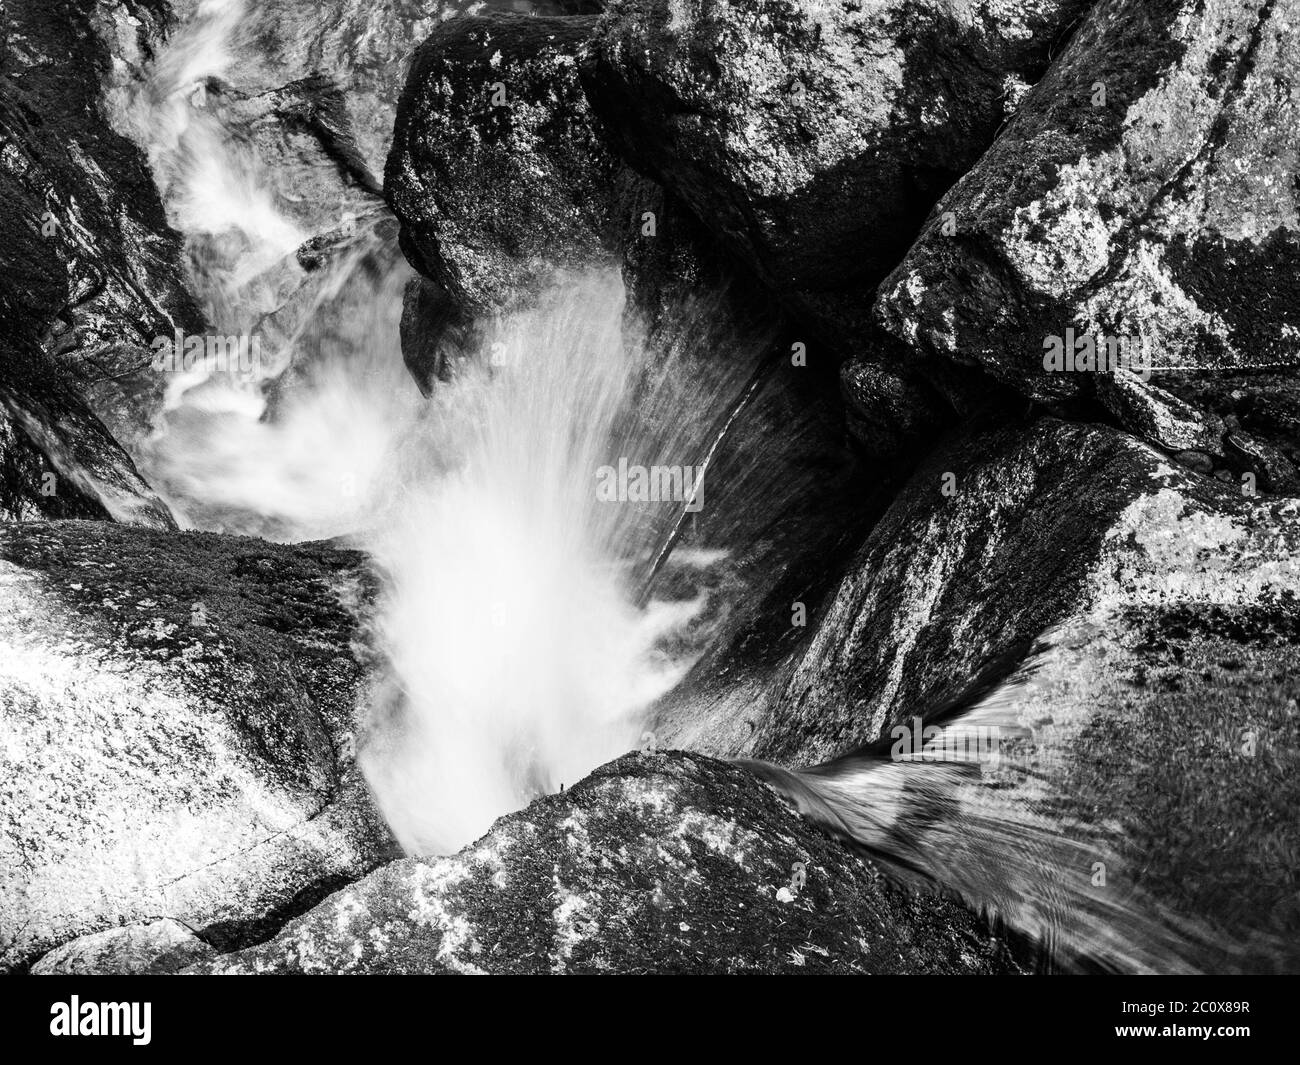 Water cascade of small creek between mossy stones. Long exposure Black and white image. Stock Photo